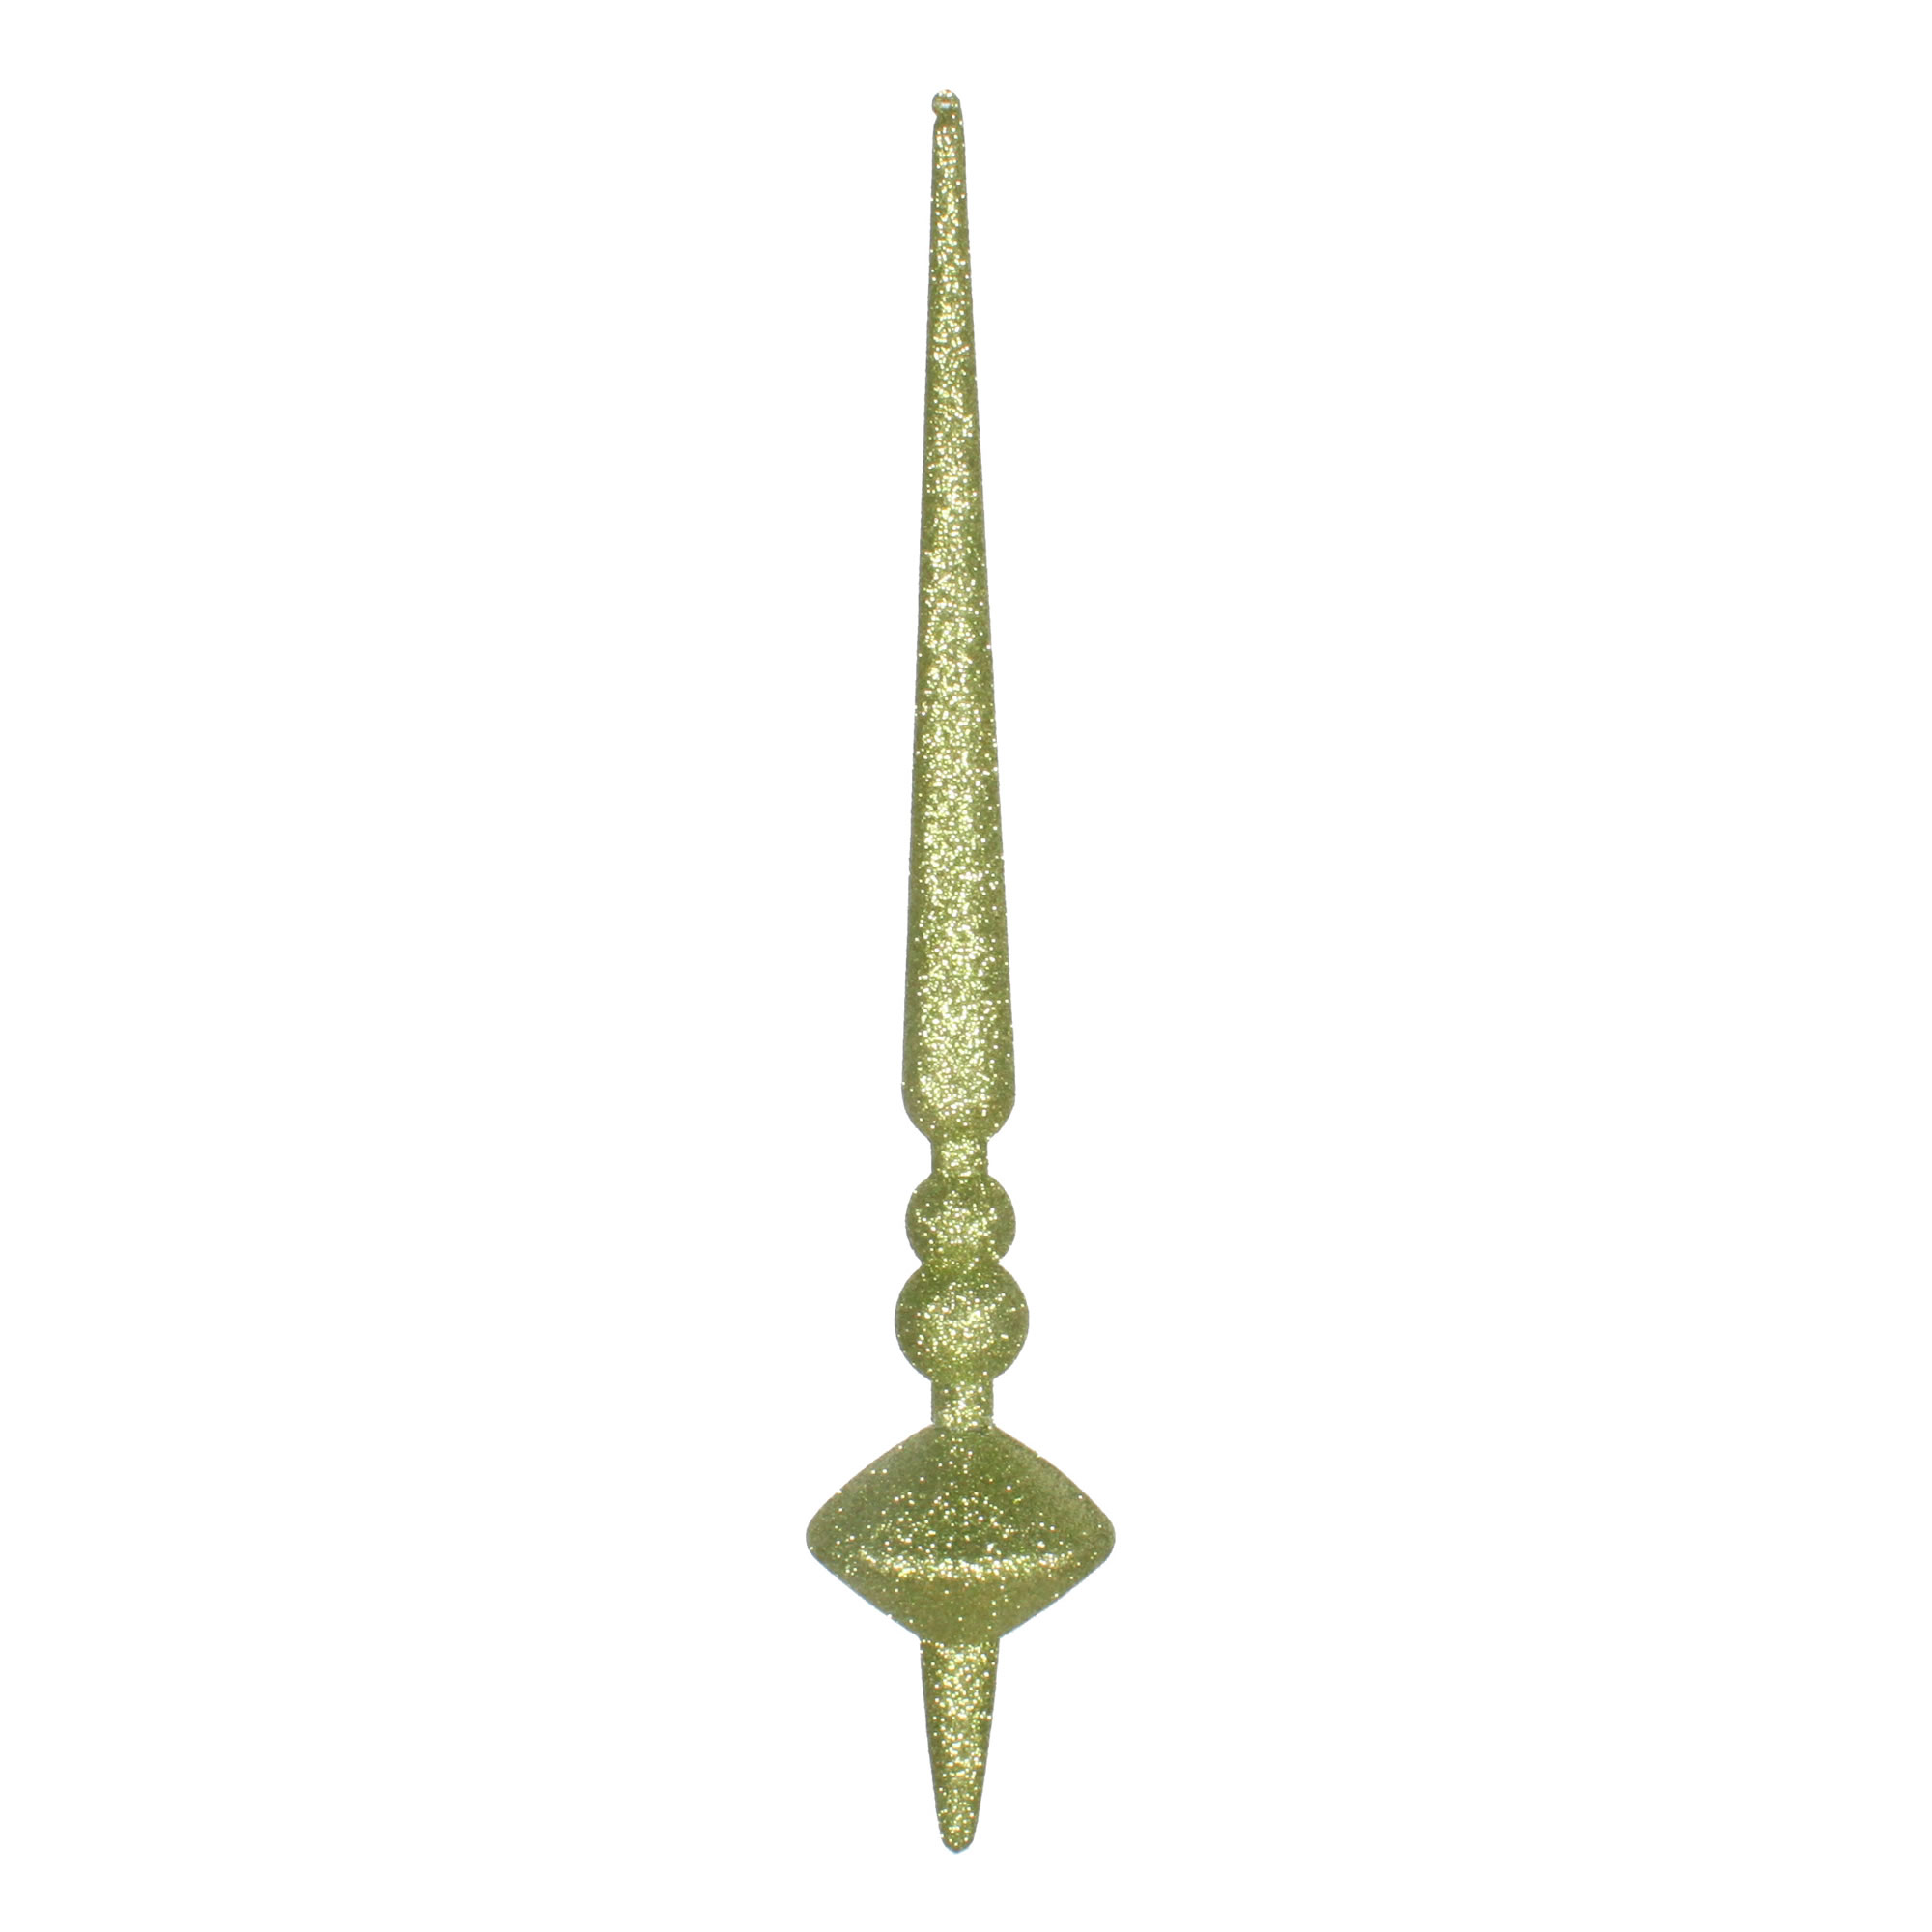 Vickerman 12" Lime Glitter Cupola Finial Ornament, Pack of 3 - image 1 of 3